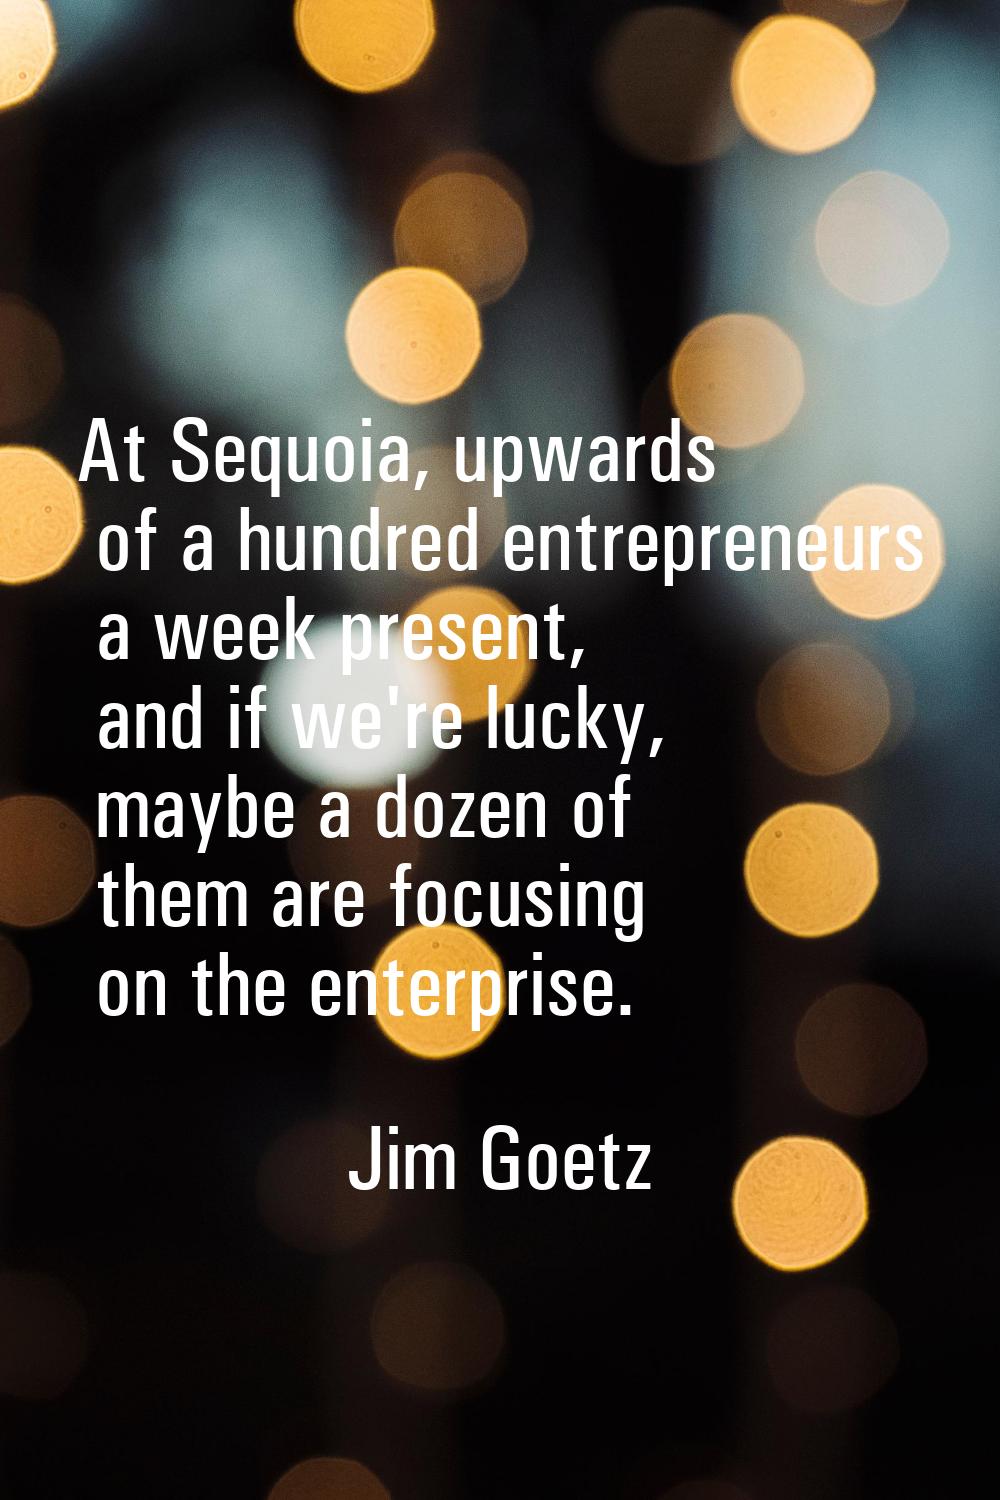 At Sequoia, upwards of a hundred entrepreneurs a week present, and if we're lucky, maybe a dozen of